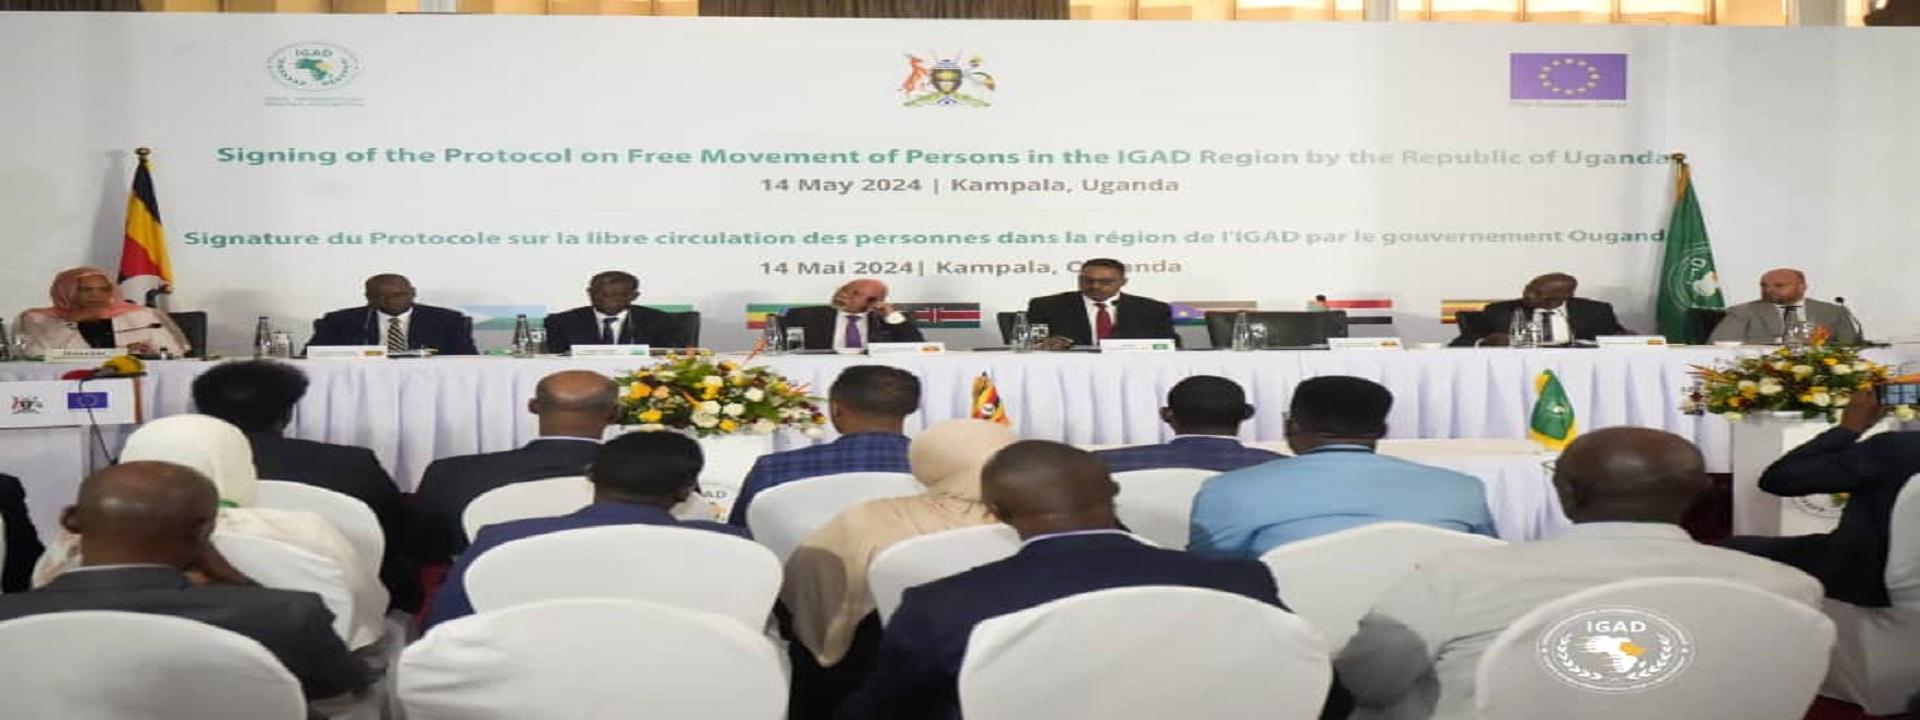 Uganda Signs the IGAD Free Movement Of Persons Protocol